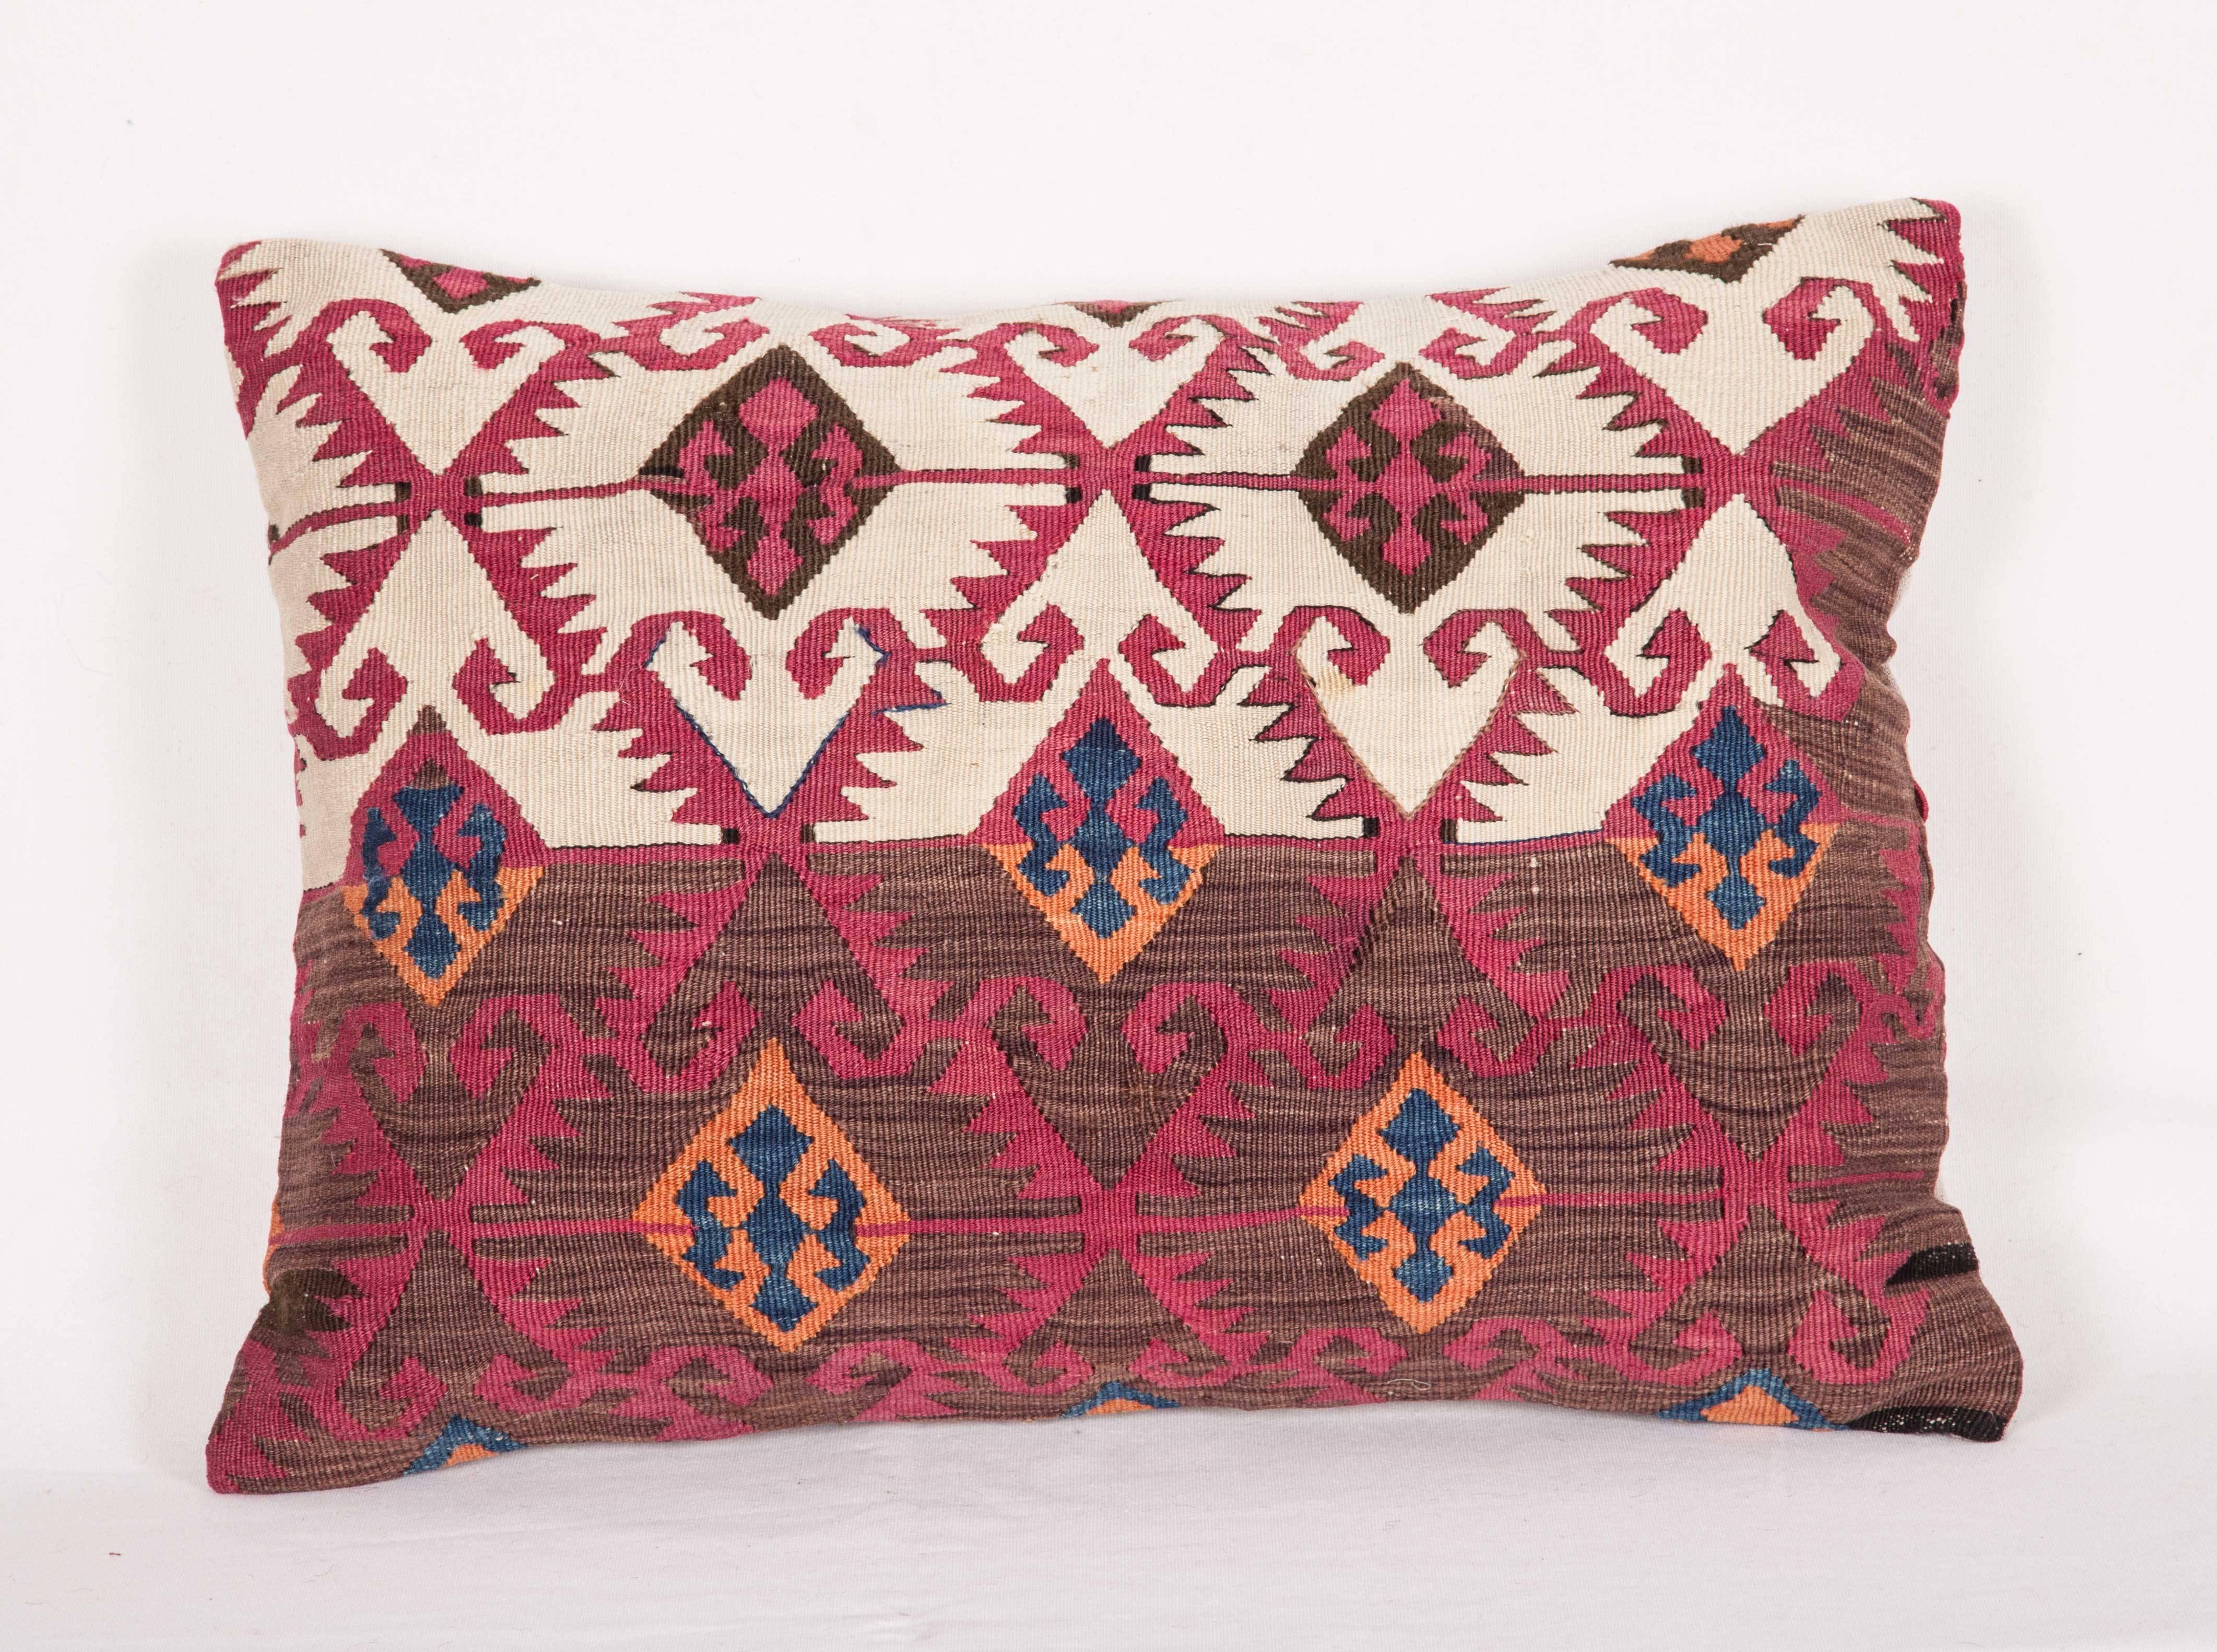 The pillows are made out of a late 19th century, Anatolian Kilim fragment. It does not come with an insert but it comes with a bag made to the size and out of cotton to accommodate the filling. The backing is made of linen. Please note filling is